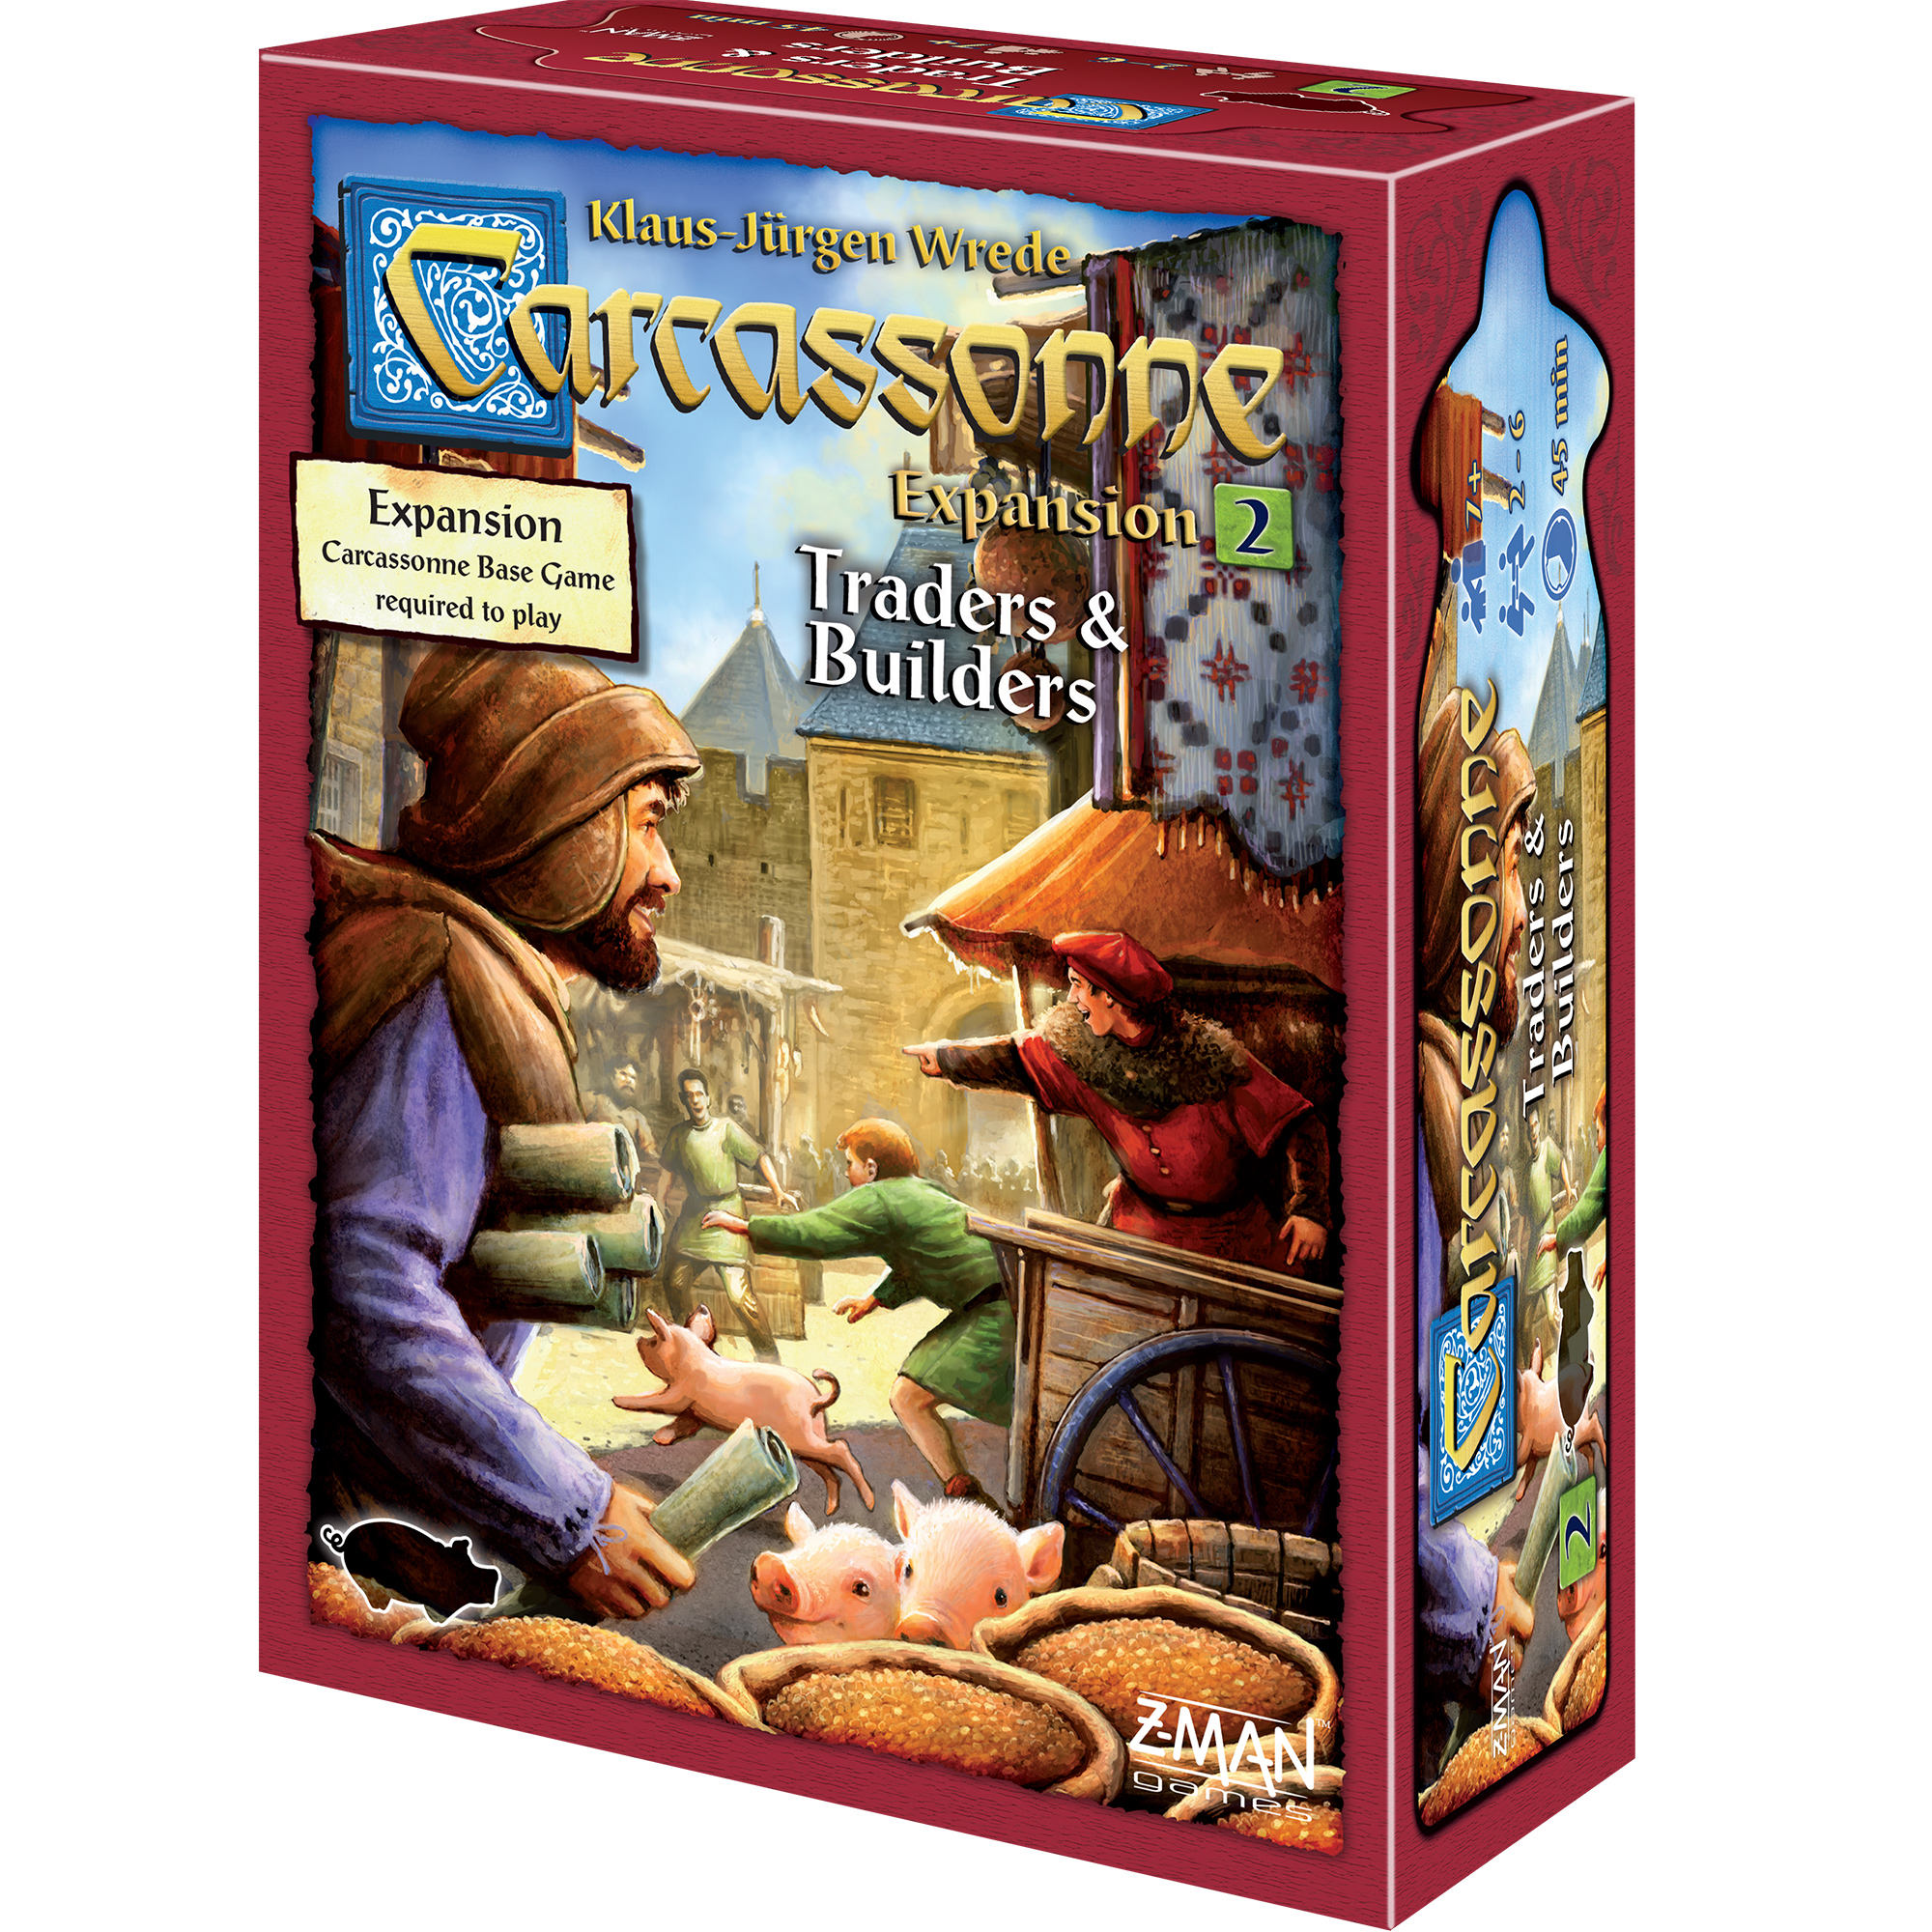 Carcassonne Expansion 2: Traders & Builders Board Game for Ages 7 and Up, from Asmodee - image 2 of 7